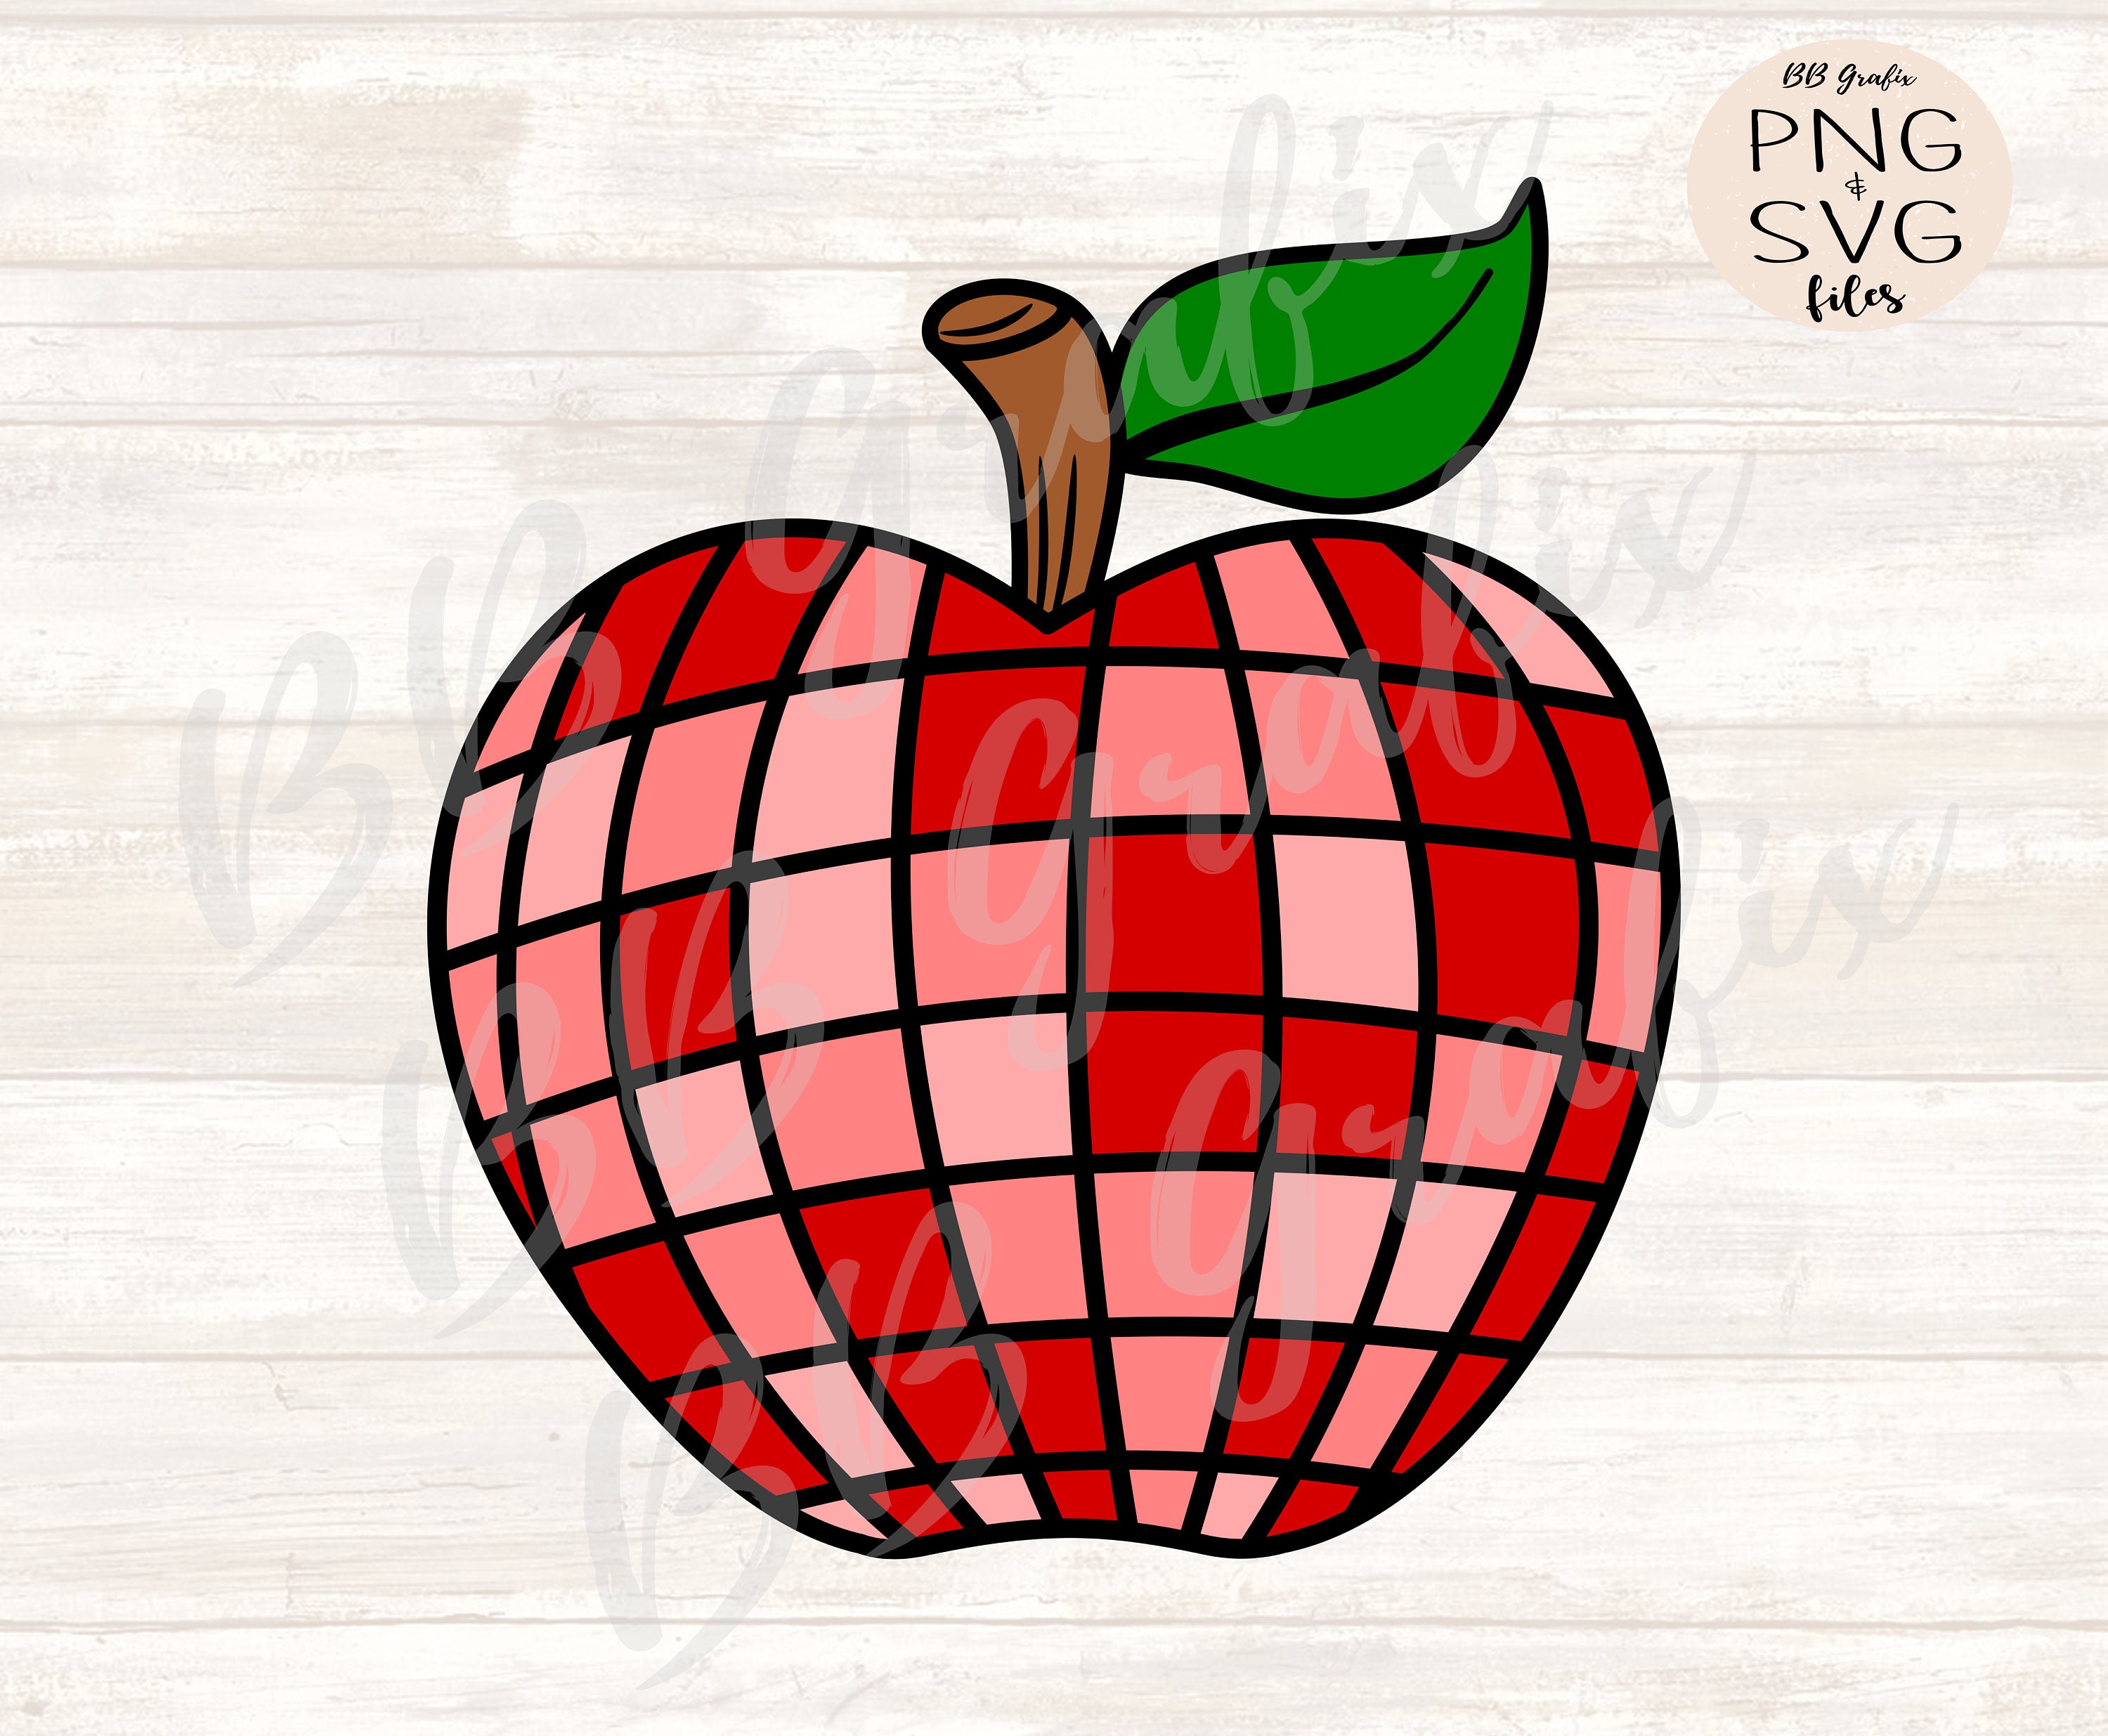 File:Red apple.svg - Wikimedia Commons